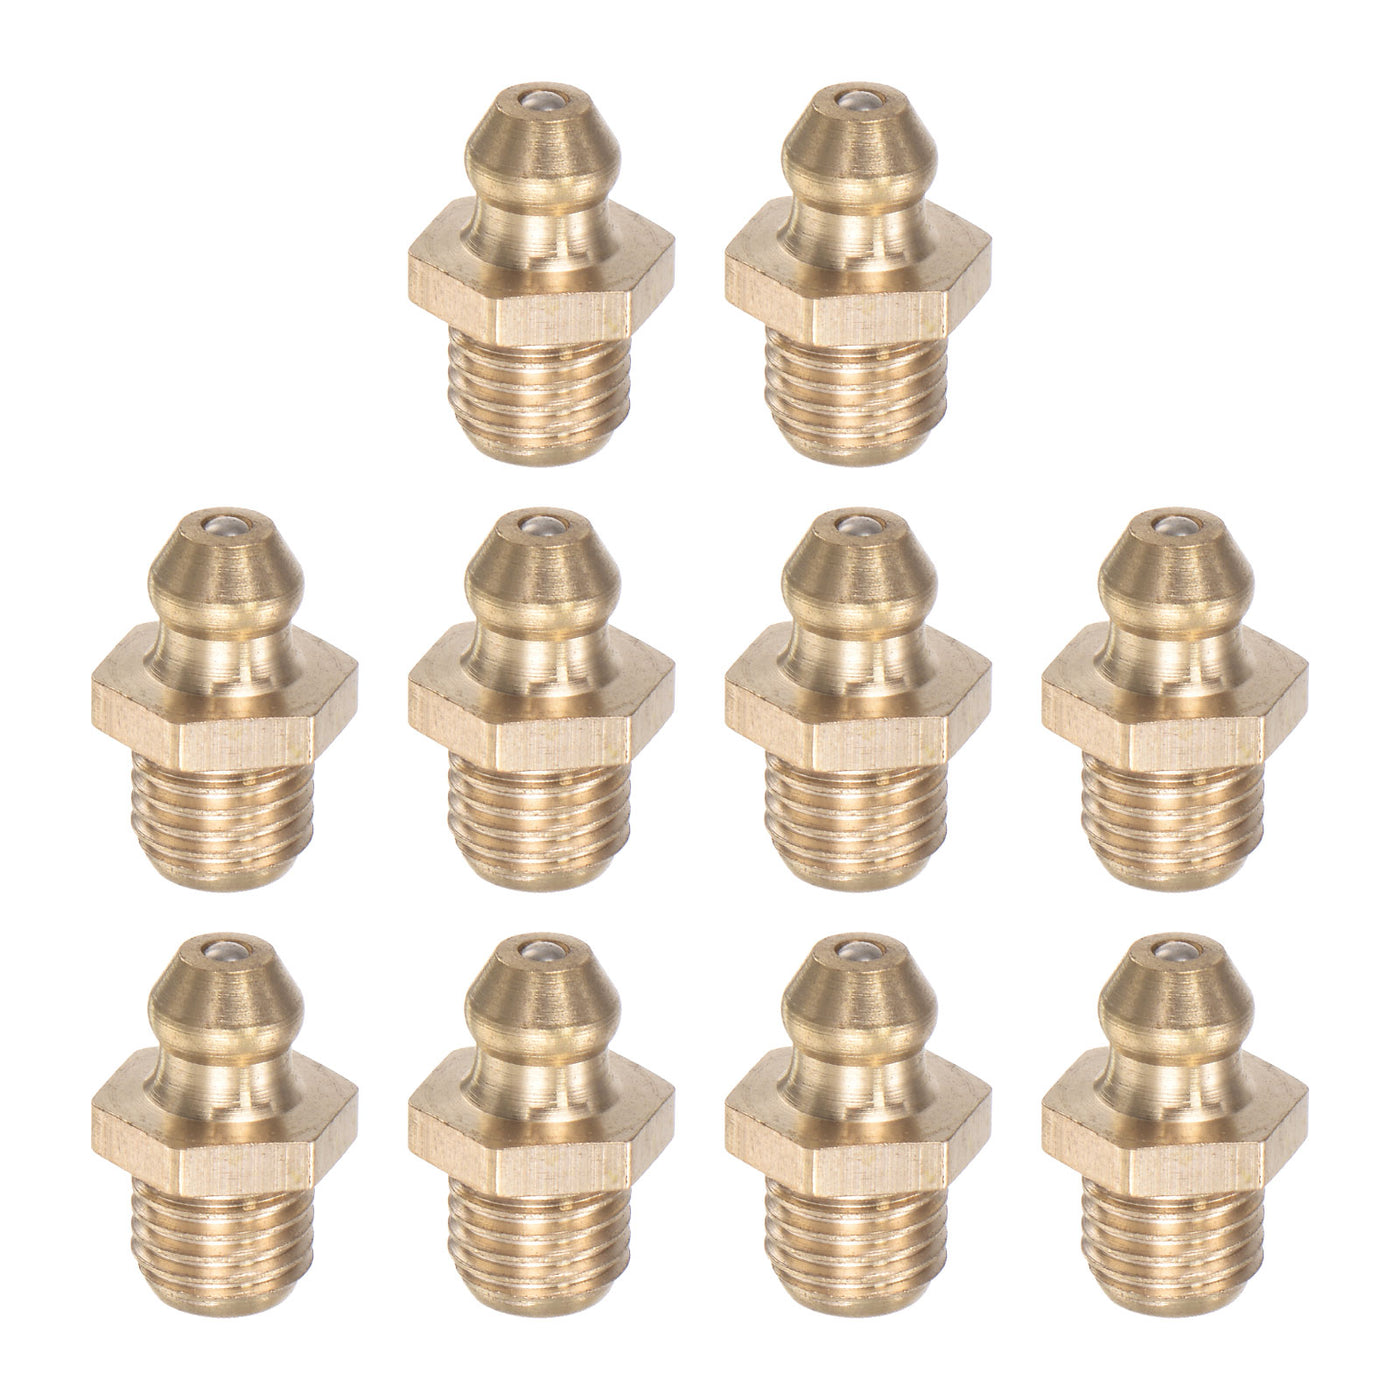 Uxcell Uxcell Brass Hydraulic Grease Fitting Assortment M10 x 1mm Thread, 10Pcs